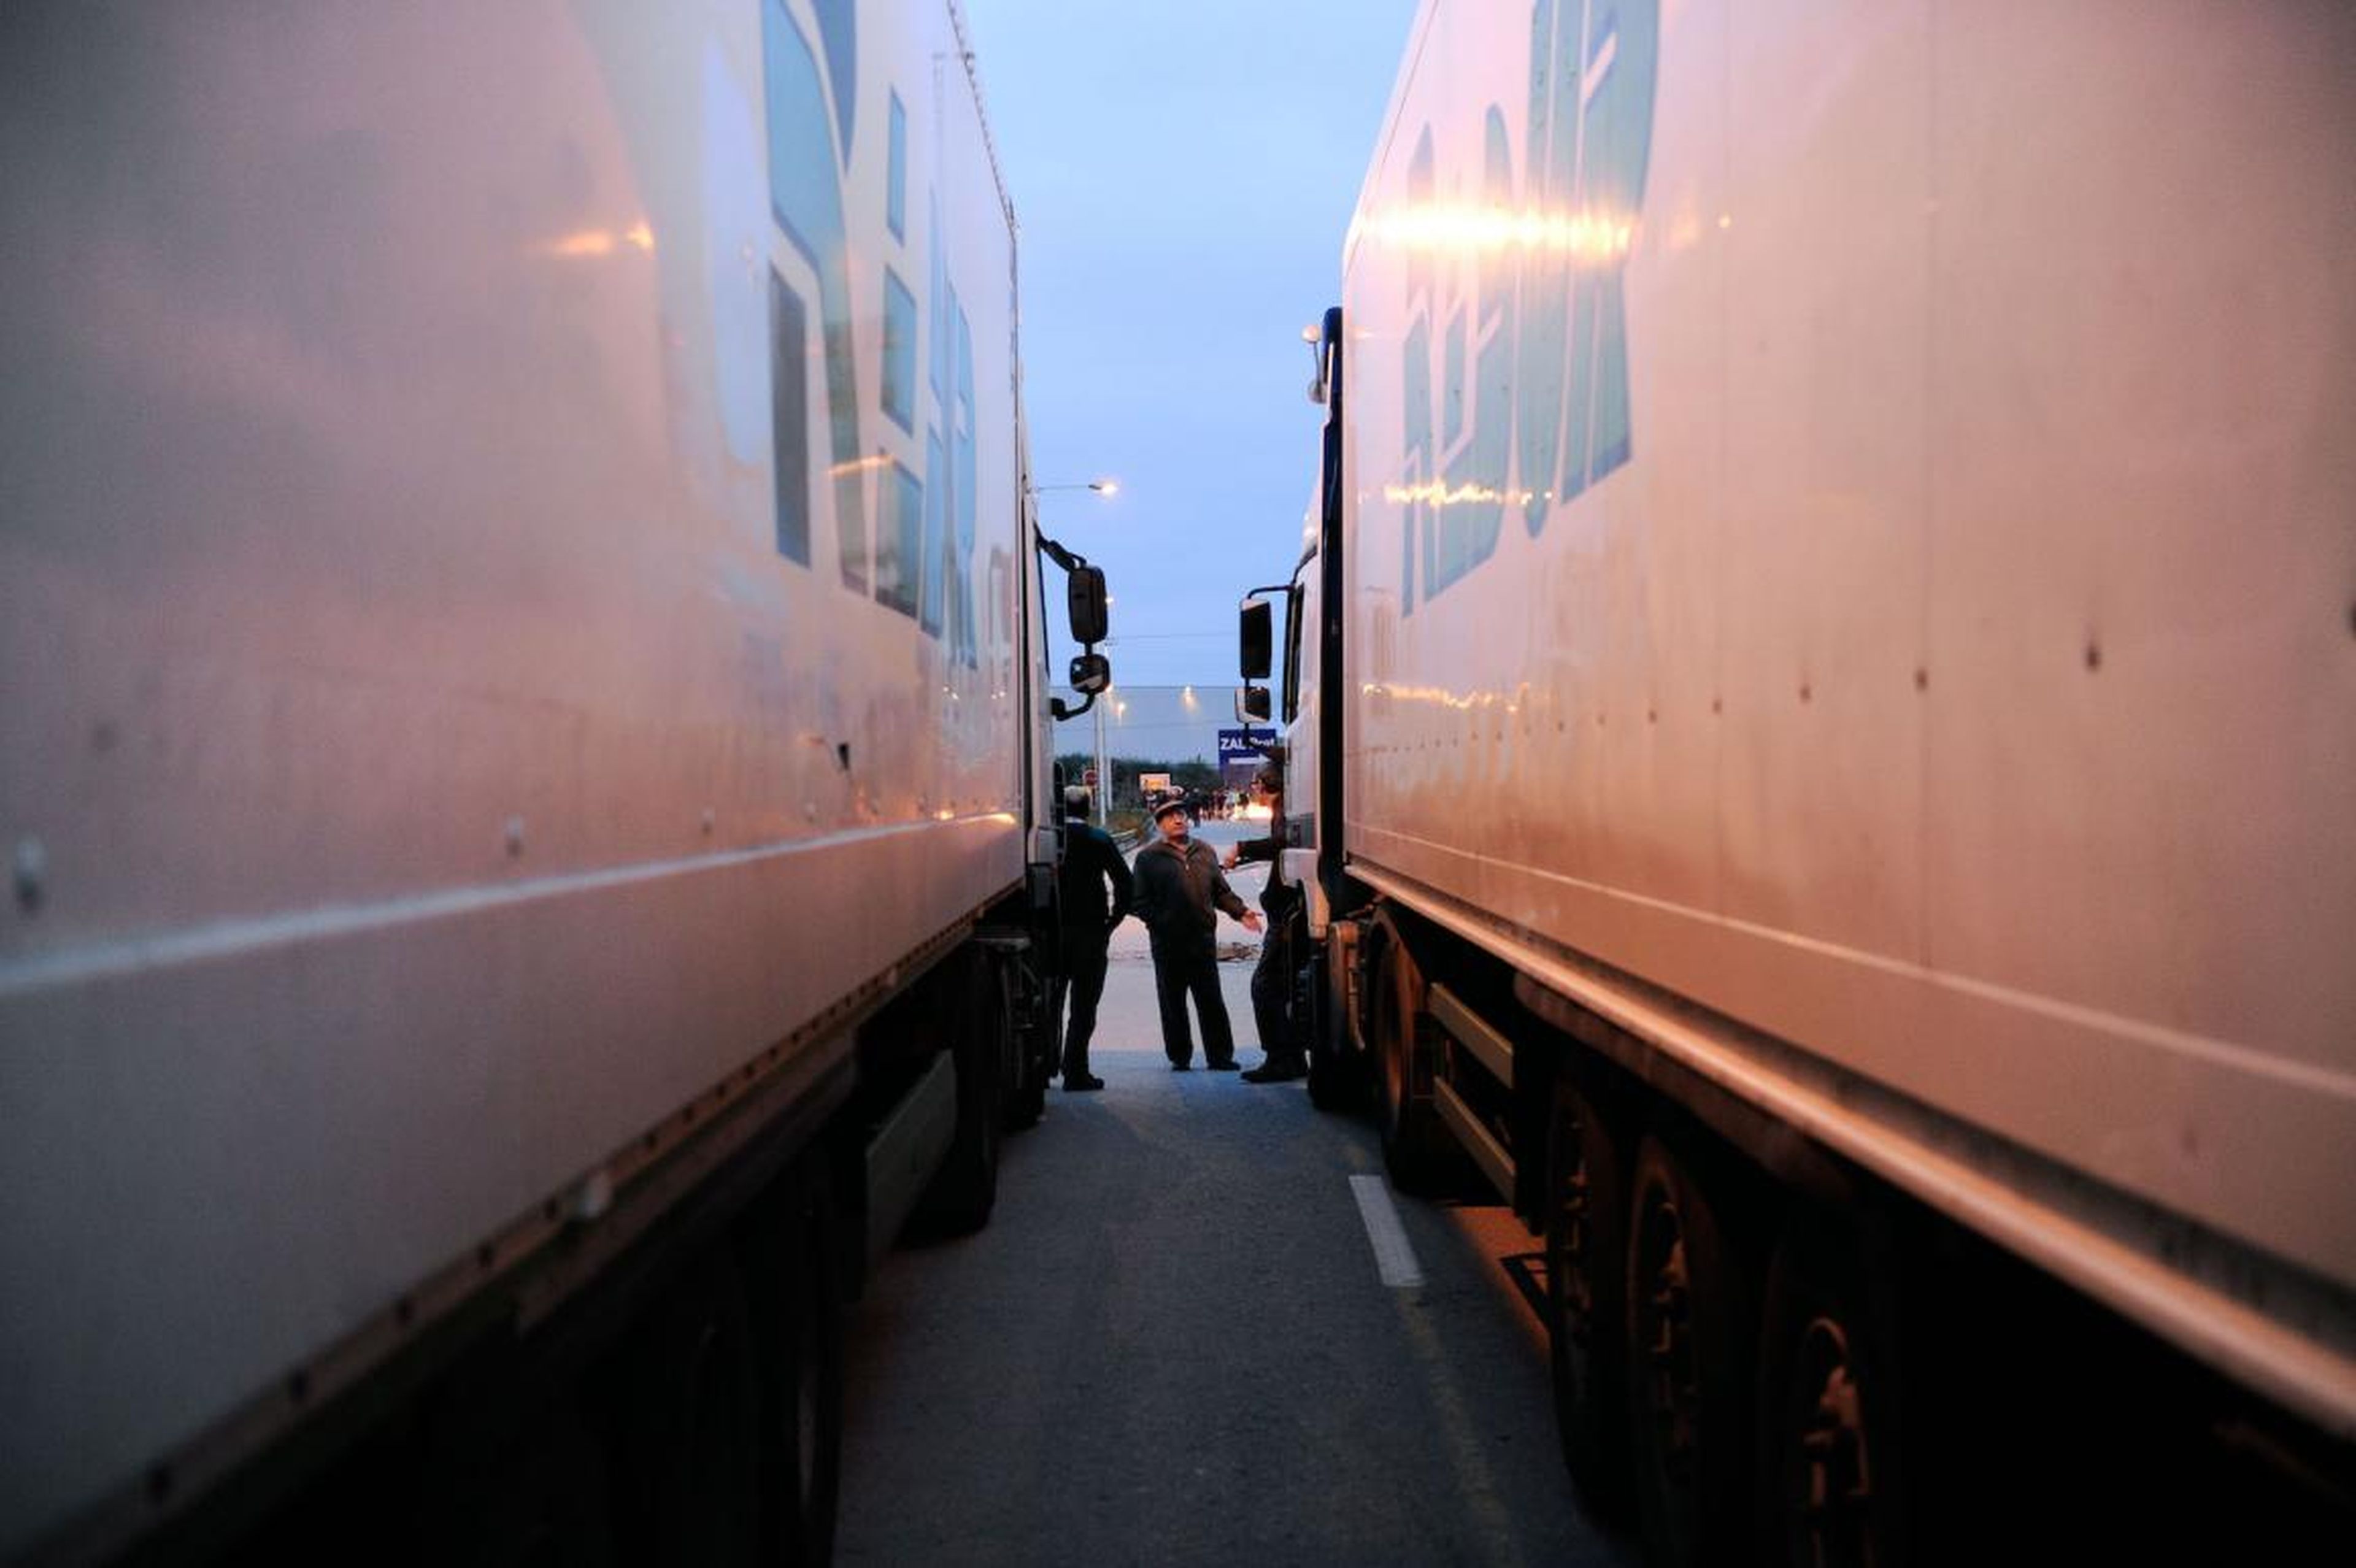 The average professional long-haul trucker logs more than 100,000 miles per year